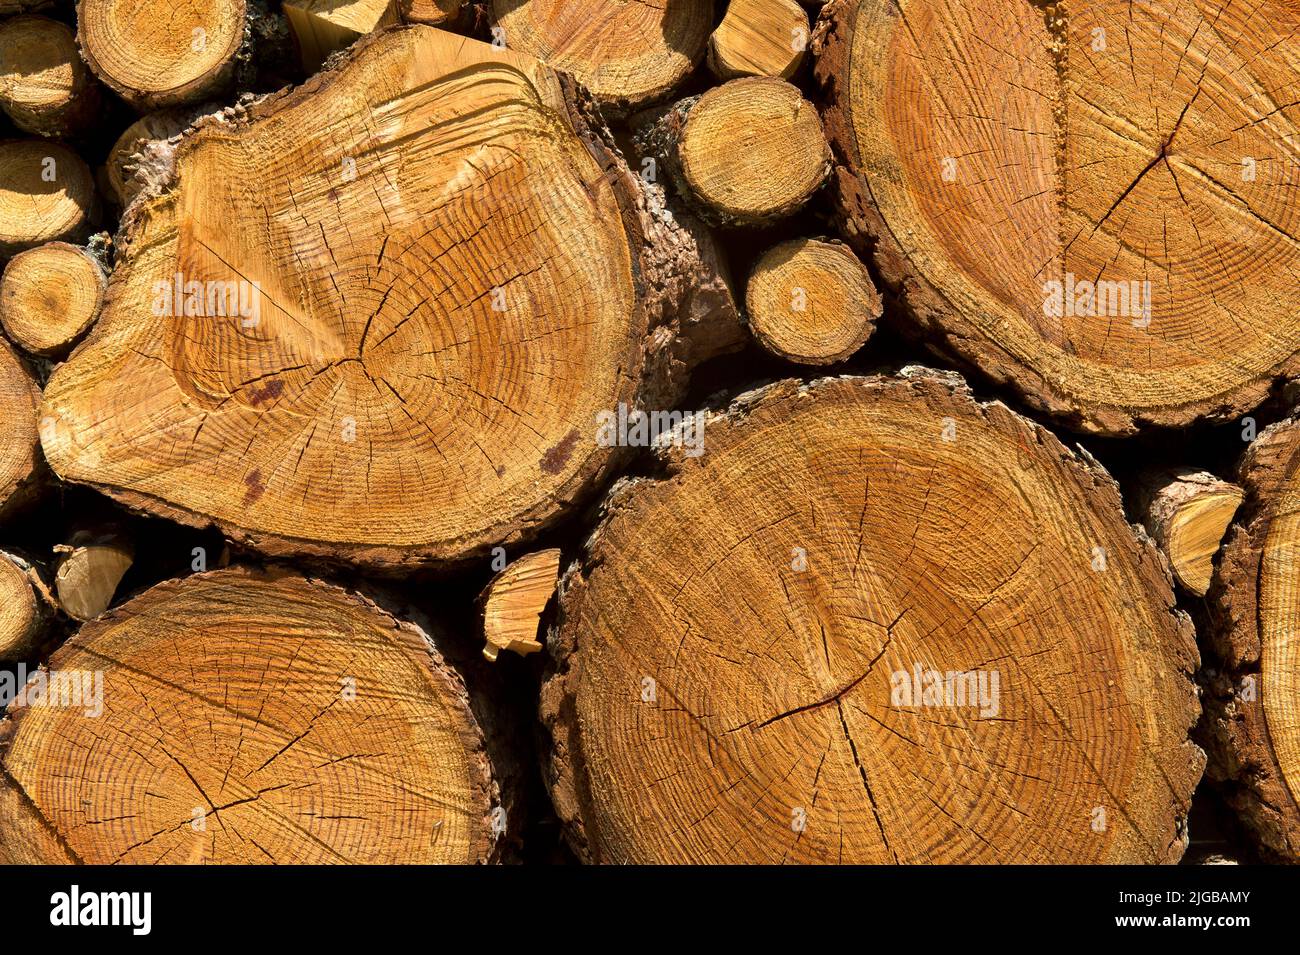 Stacked firewood from larch trees with different diameters of branches and tree trunks, Valais, Switzerland Stock Photo